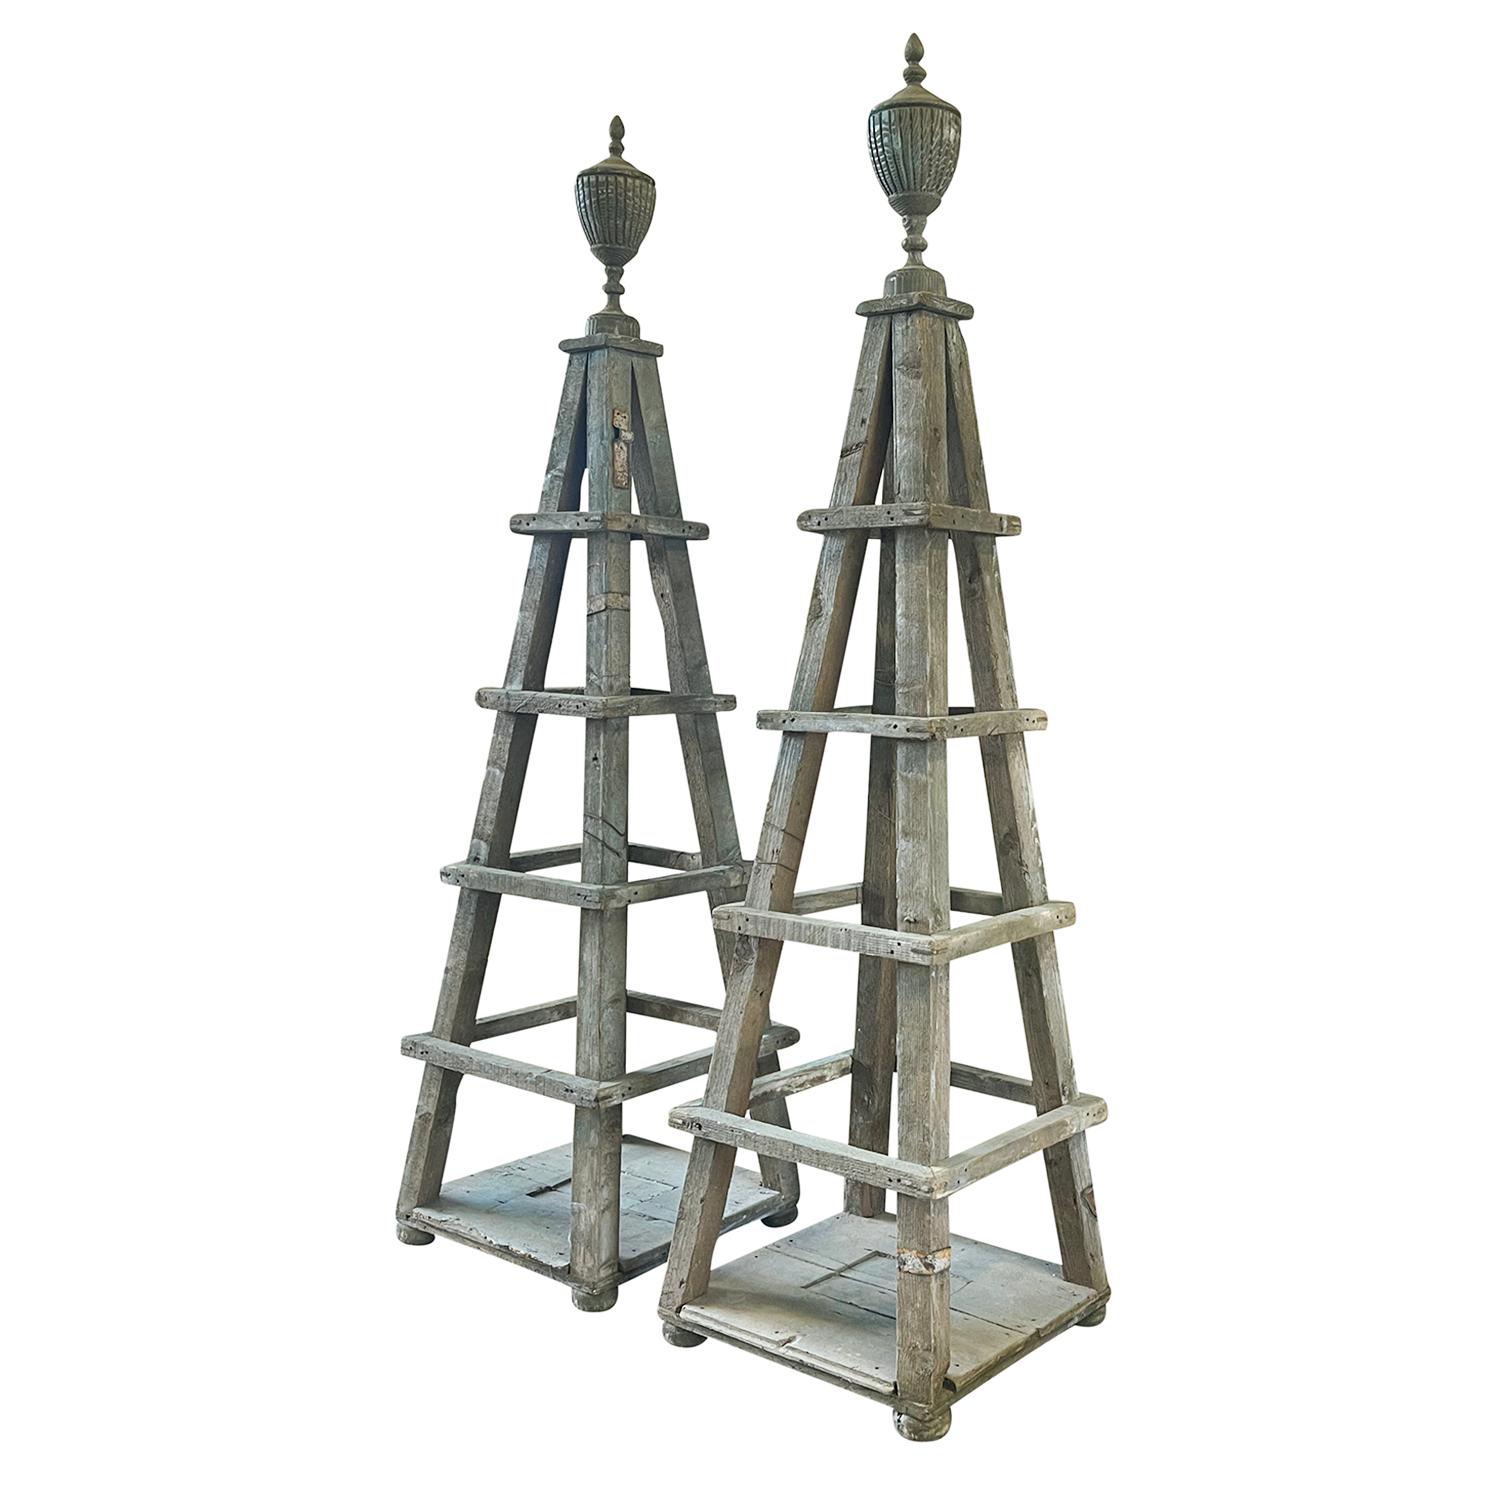 French Provincial 19th Century Pair of Tall French Antique Pinewood Garden Obelisks For Sale